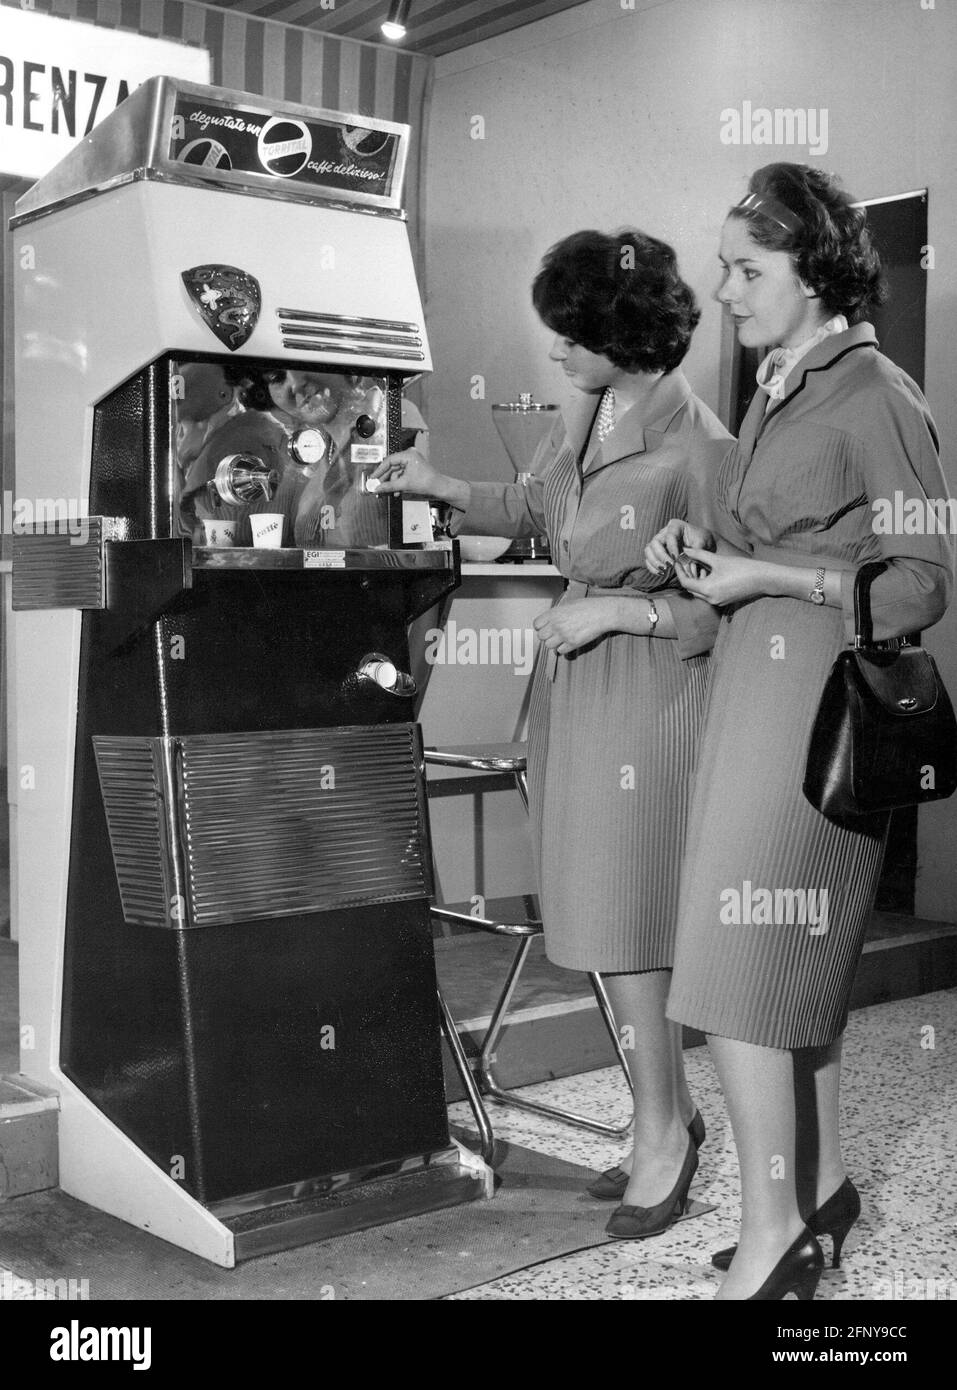 https://c8.alamy.com/comp/2FNY9CC/gastronomy-coffee-maker-two-women-testing-new-coffeemaker-by-torrital-industry-fair-milan-additional-rights-clearance-info-not-available-2FNY9CC.jpg